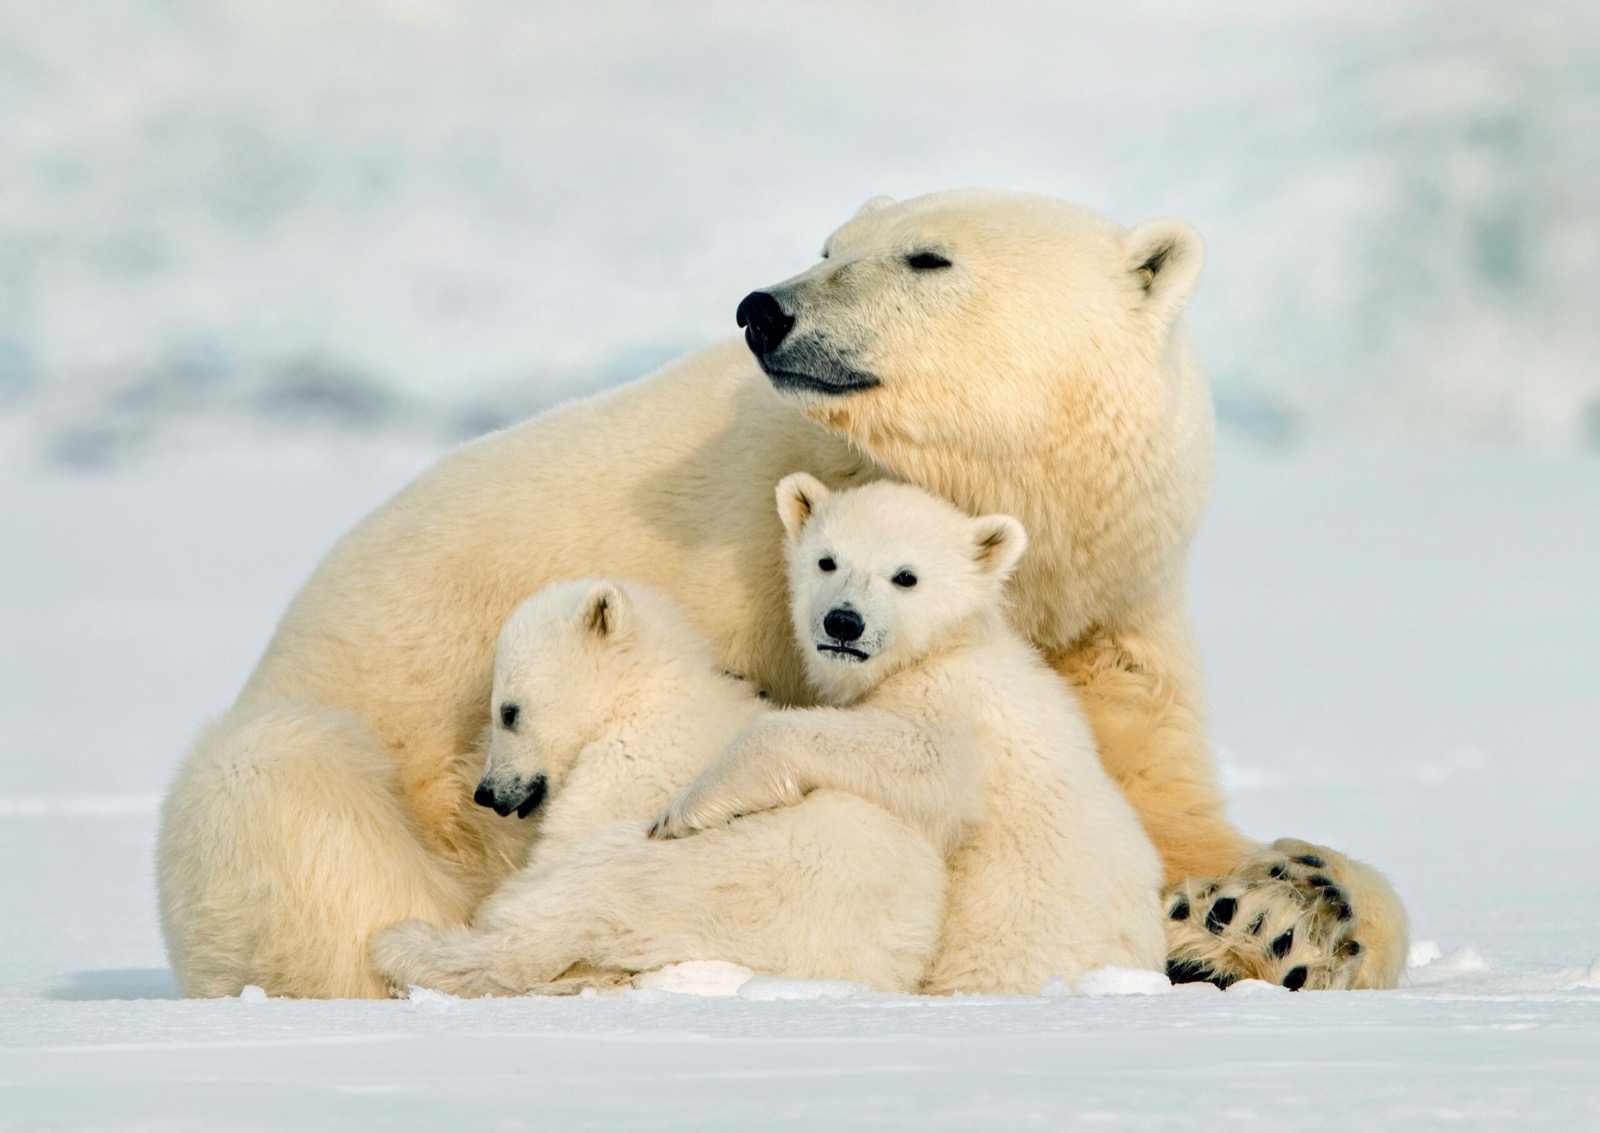 Can We Accurately Guess Your Zodiac Element Just by the Team of Animals You Build? Polar bear